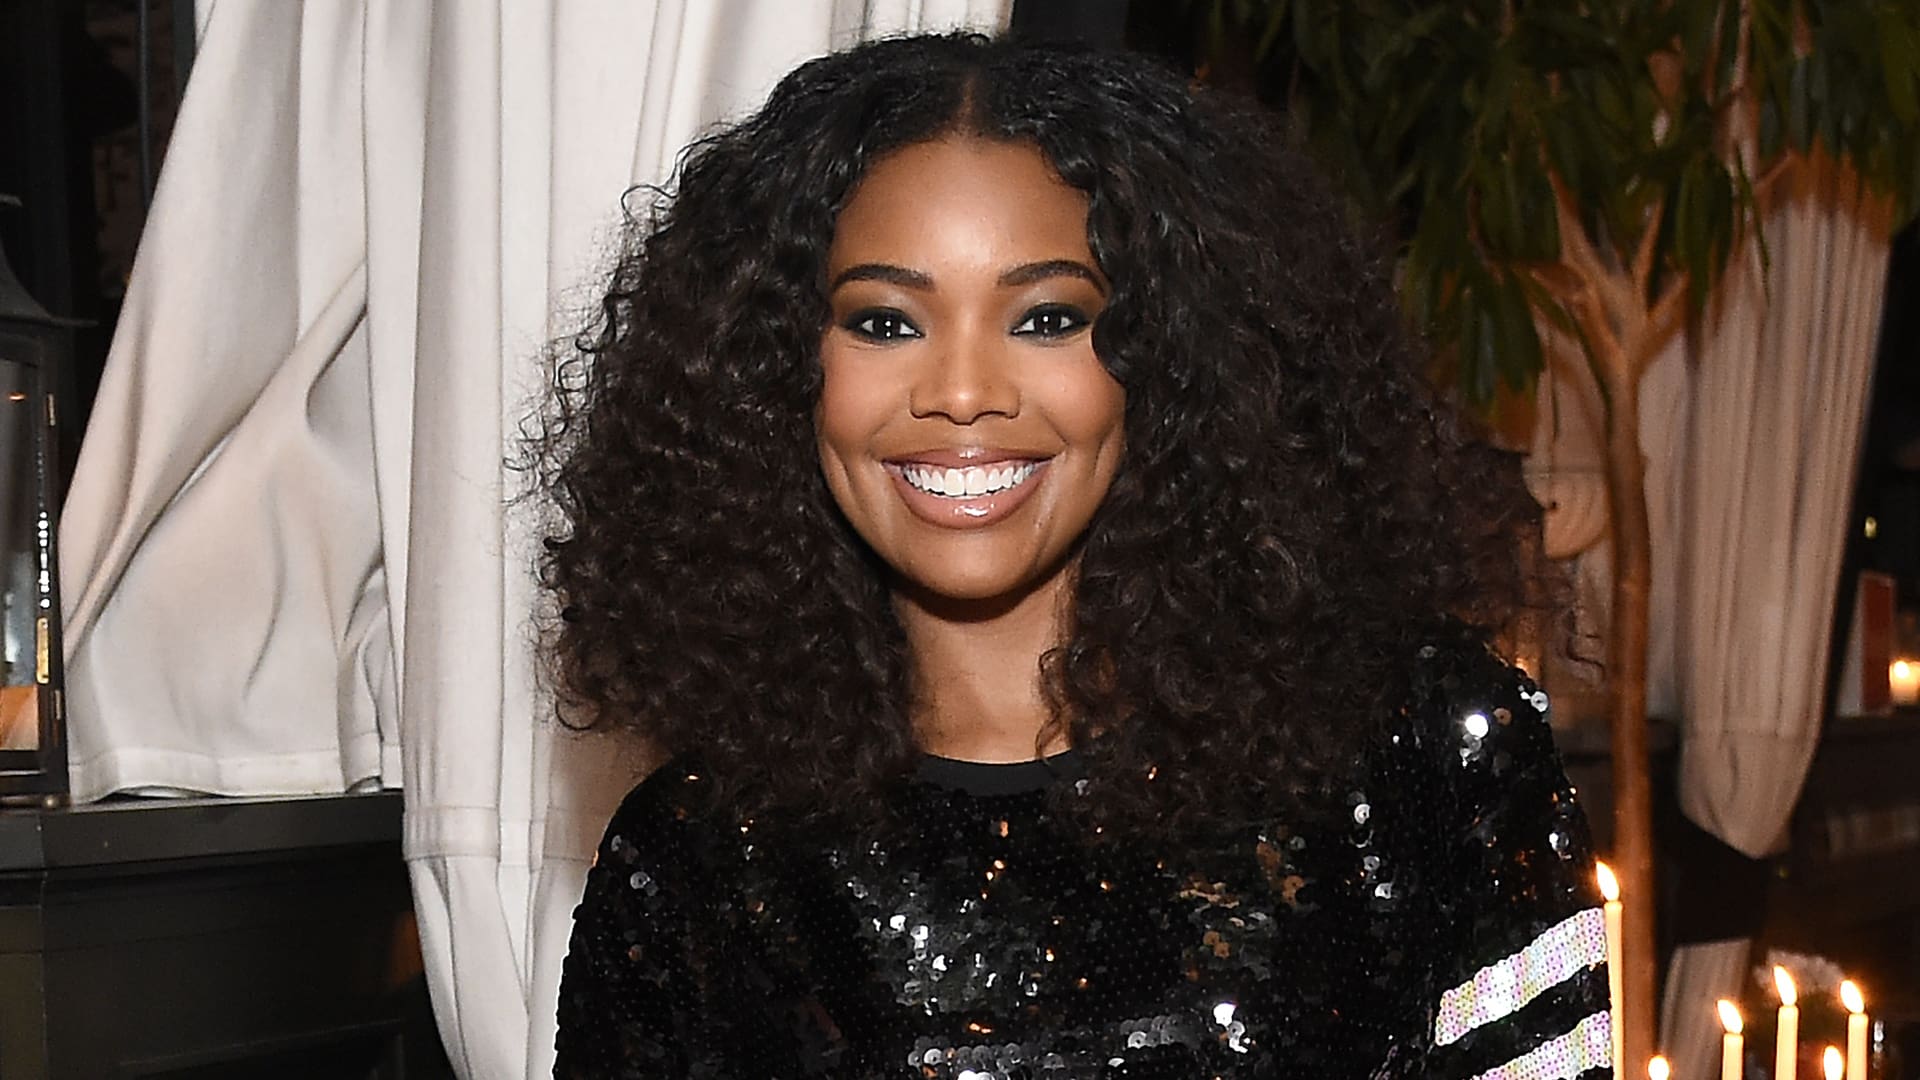 Gabrielle Union Praises A True Queen And Warrior - Check Out Her Pics And Message